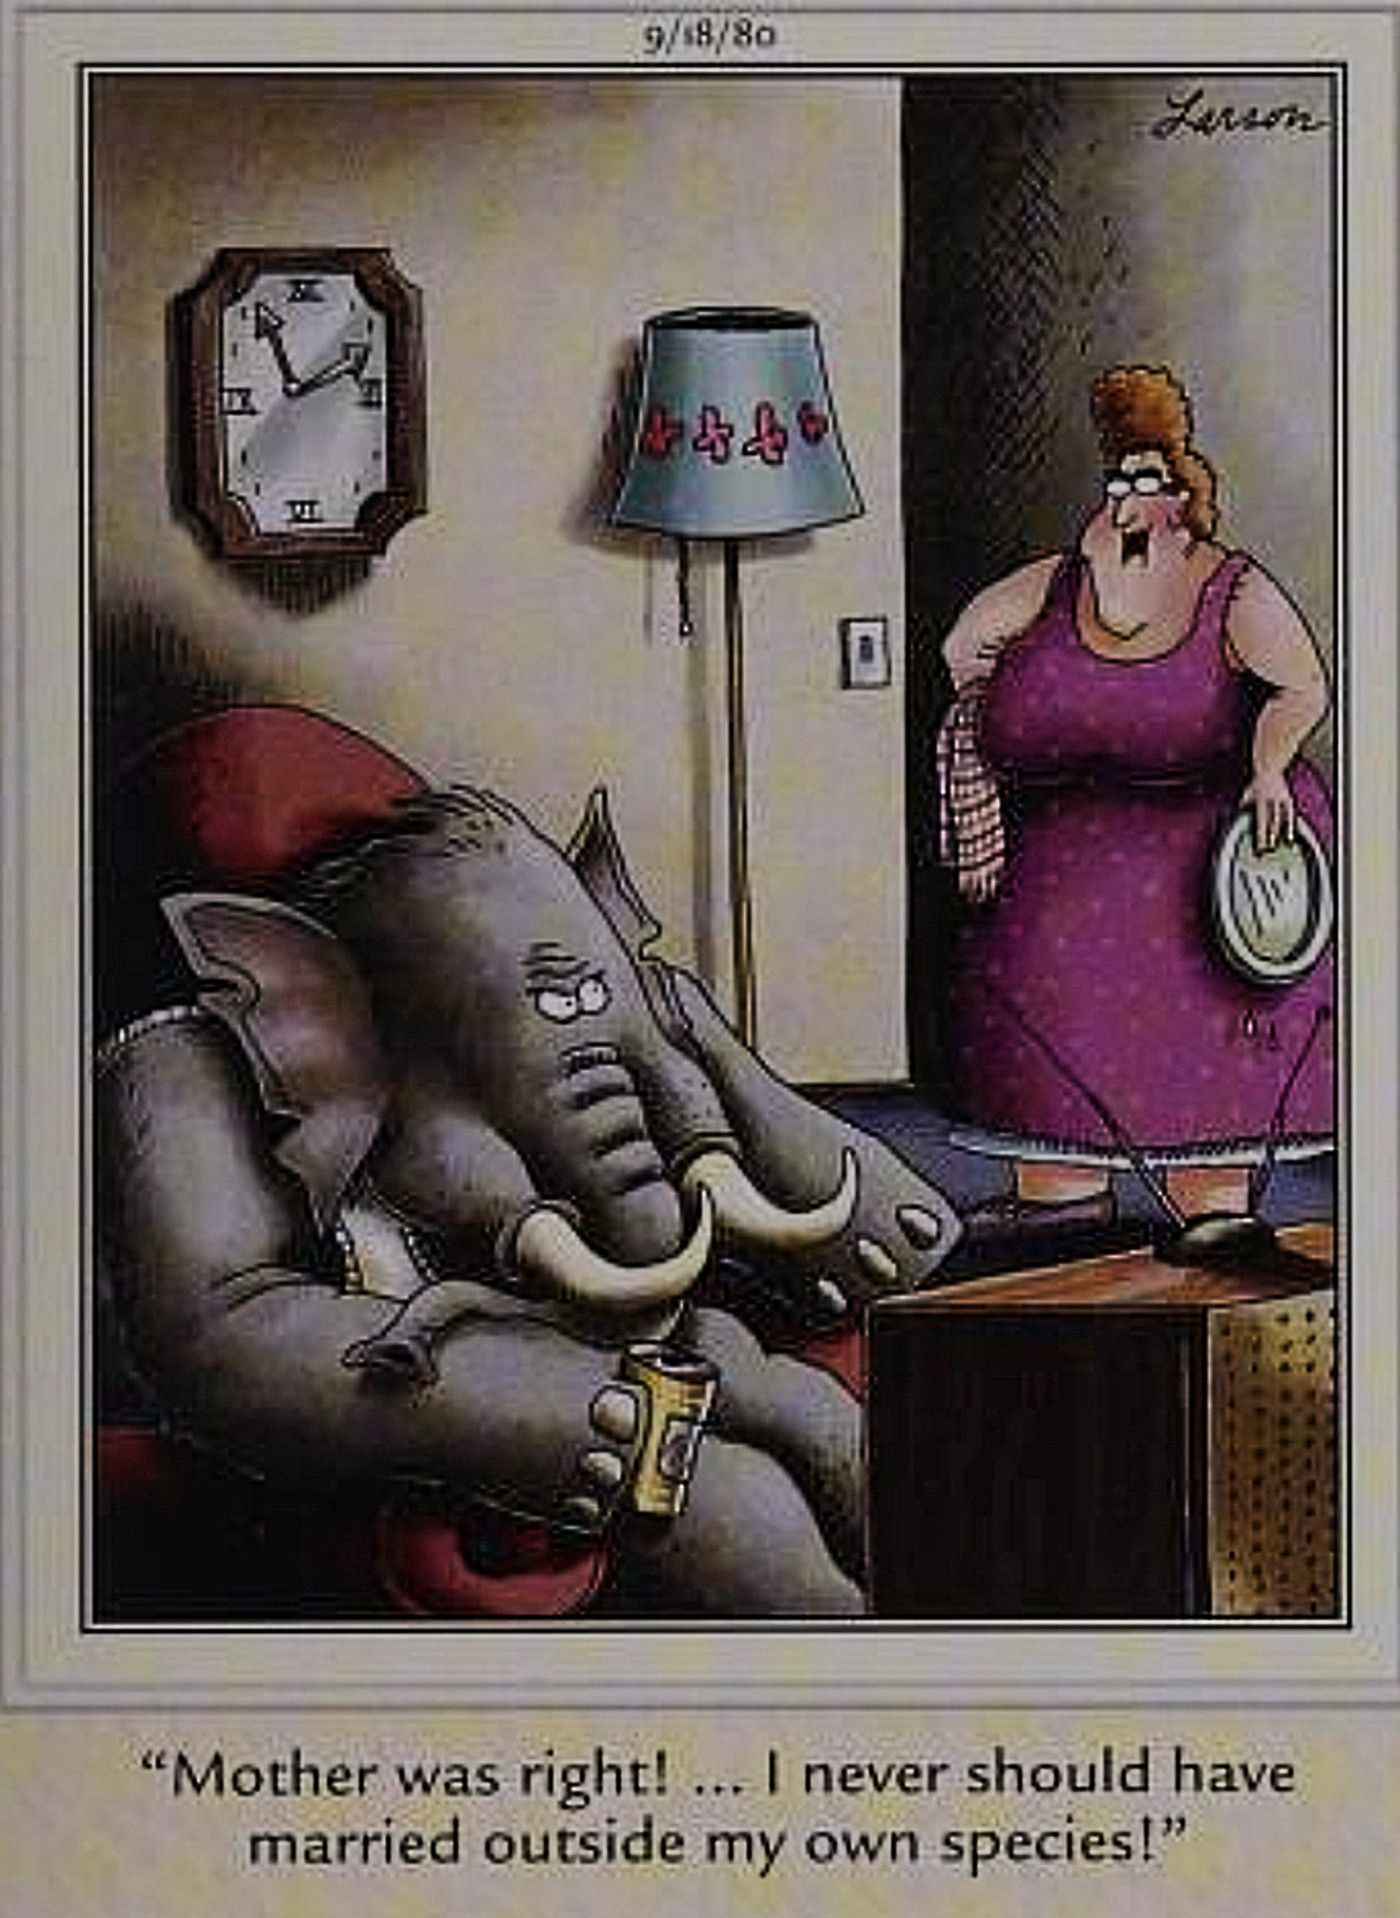 Far Side, interspecies marriage drama between a human woman and her elephant husband